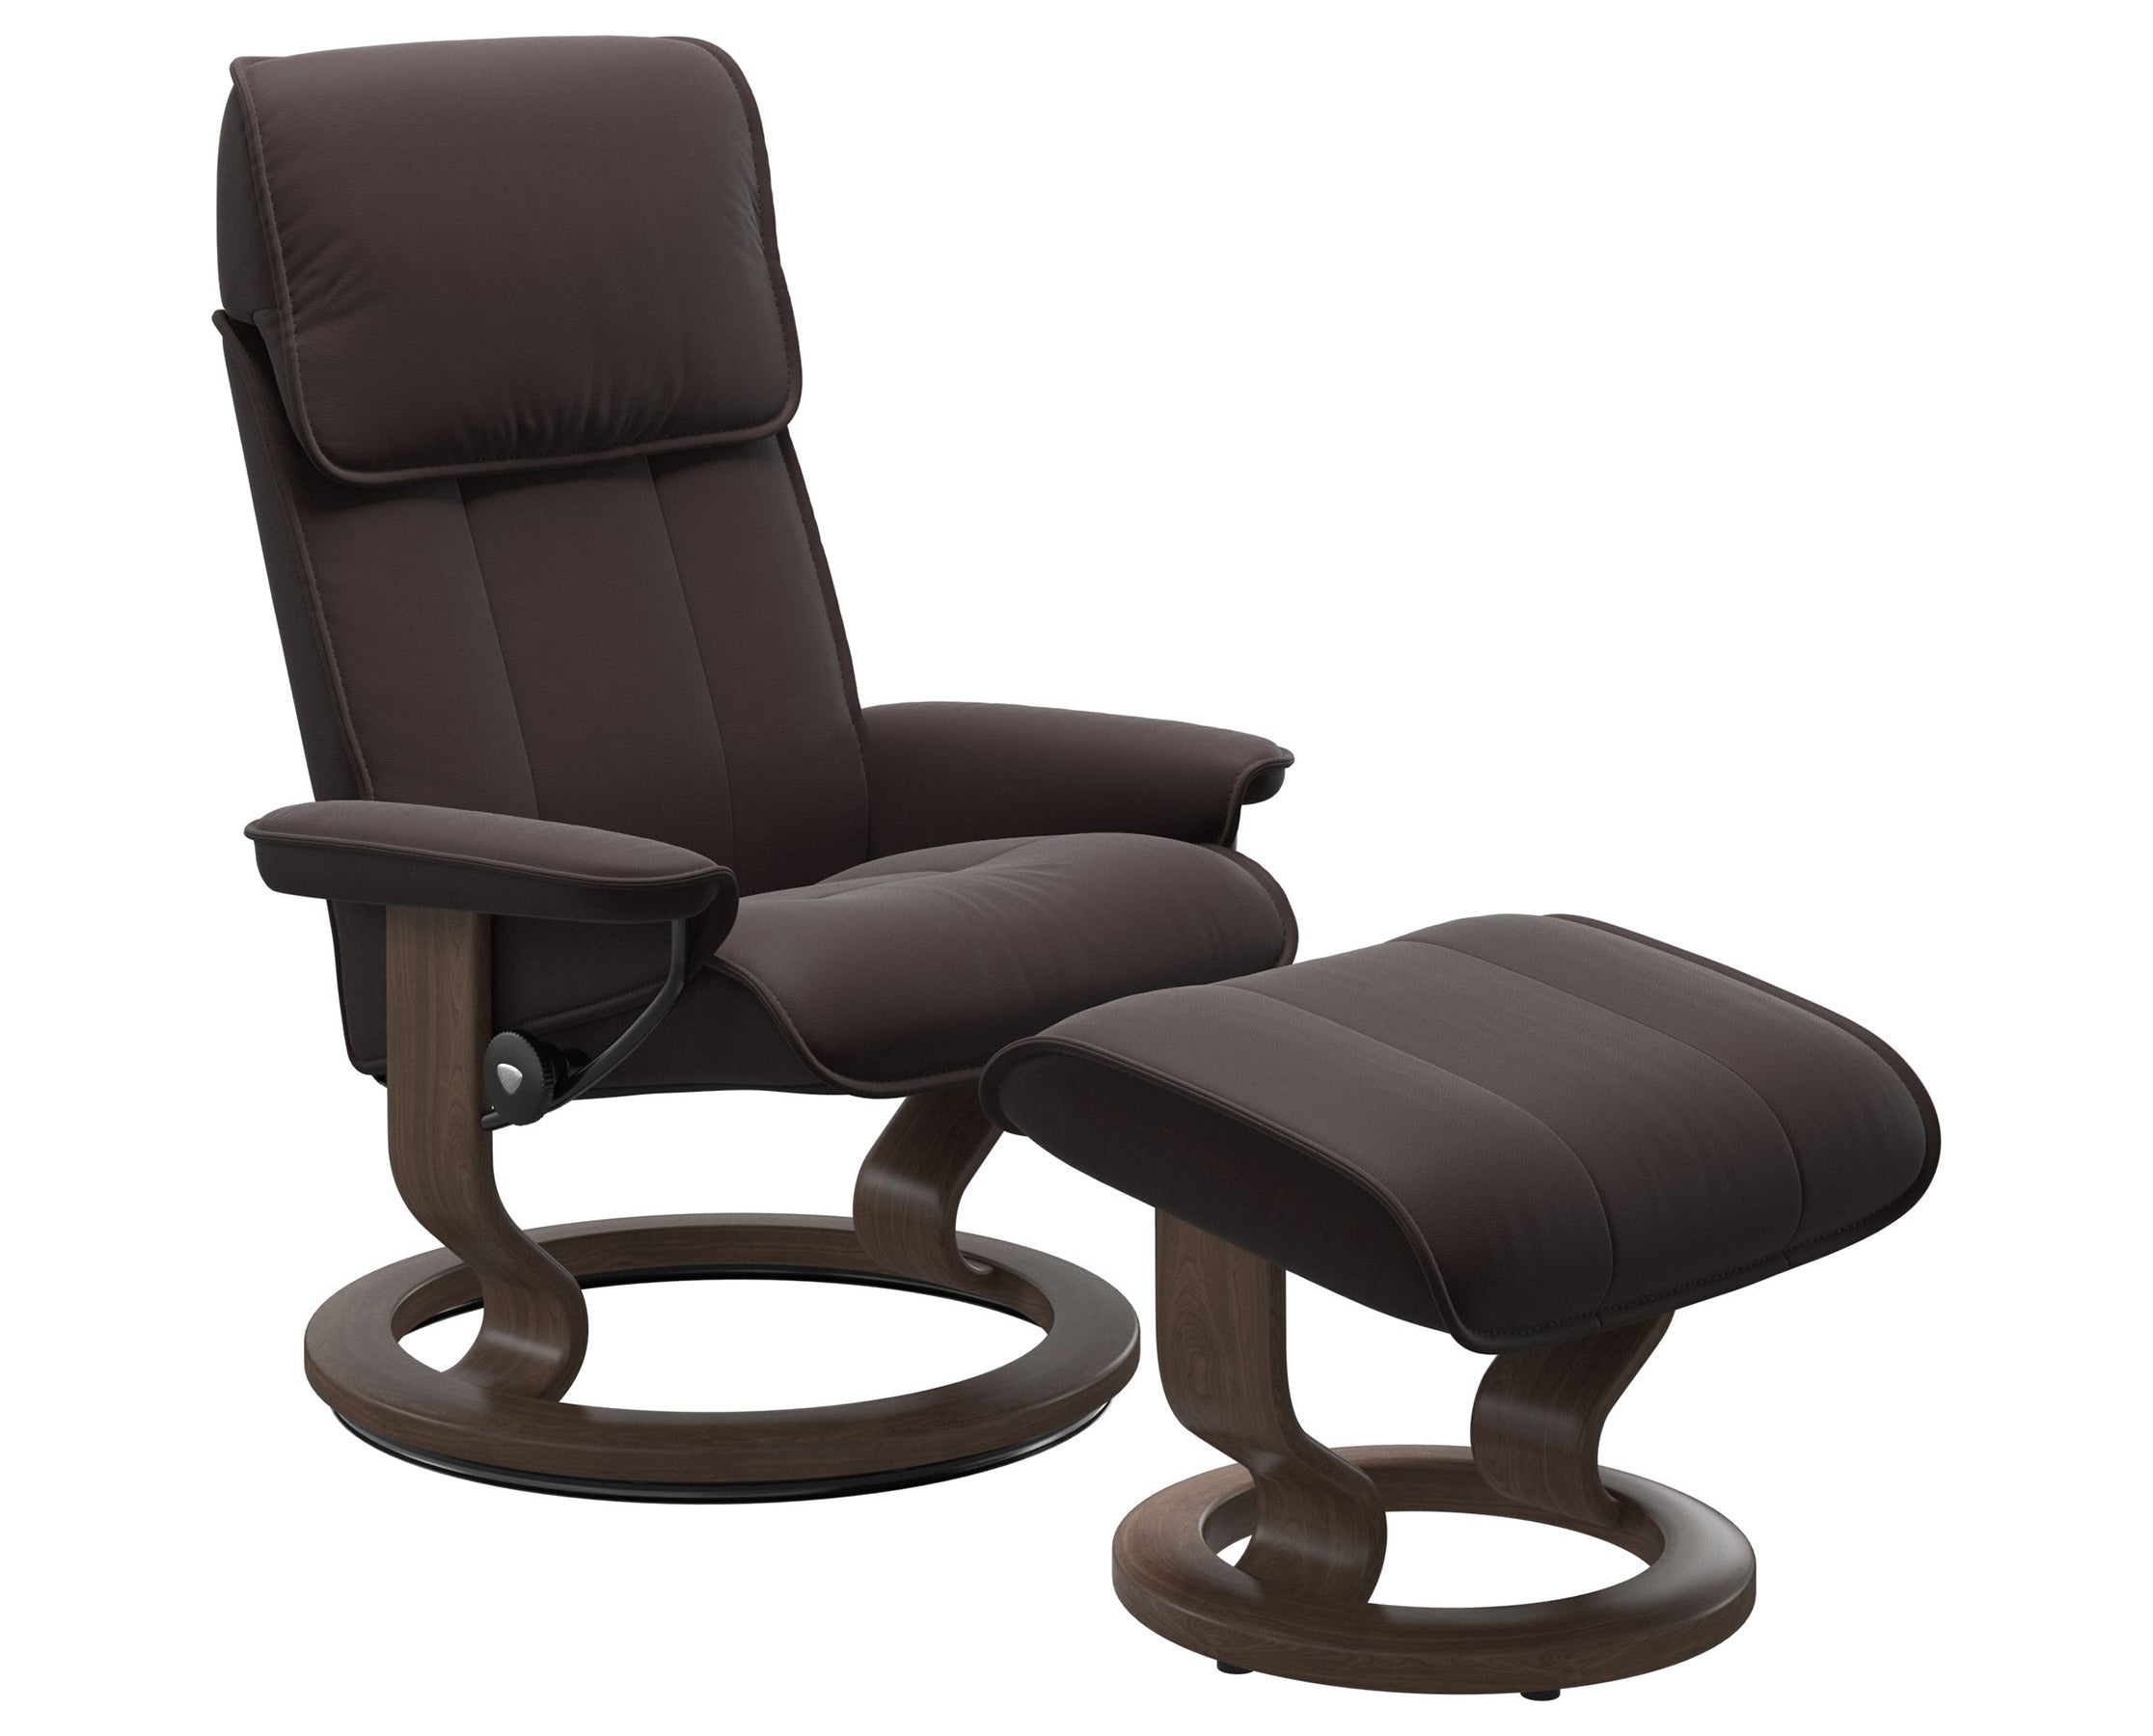 Paloma Leather Chocolate M/L and Walnut Base | Stressless Admiral Classic Recliner | Valley Ridge Furniture